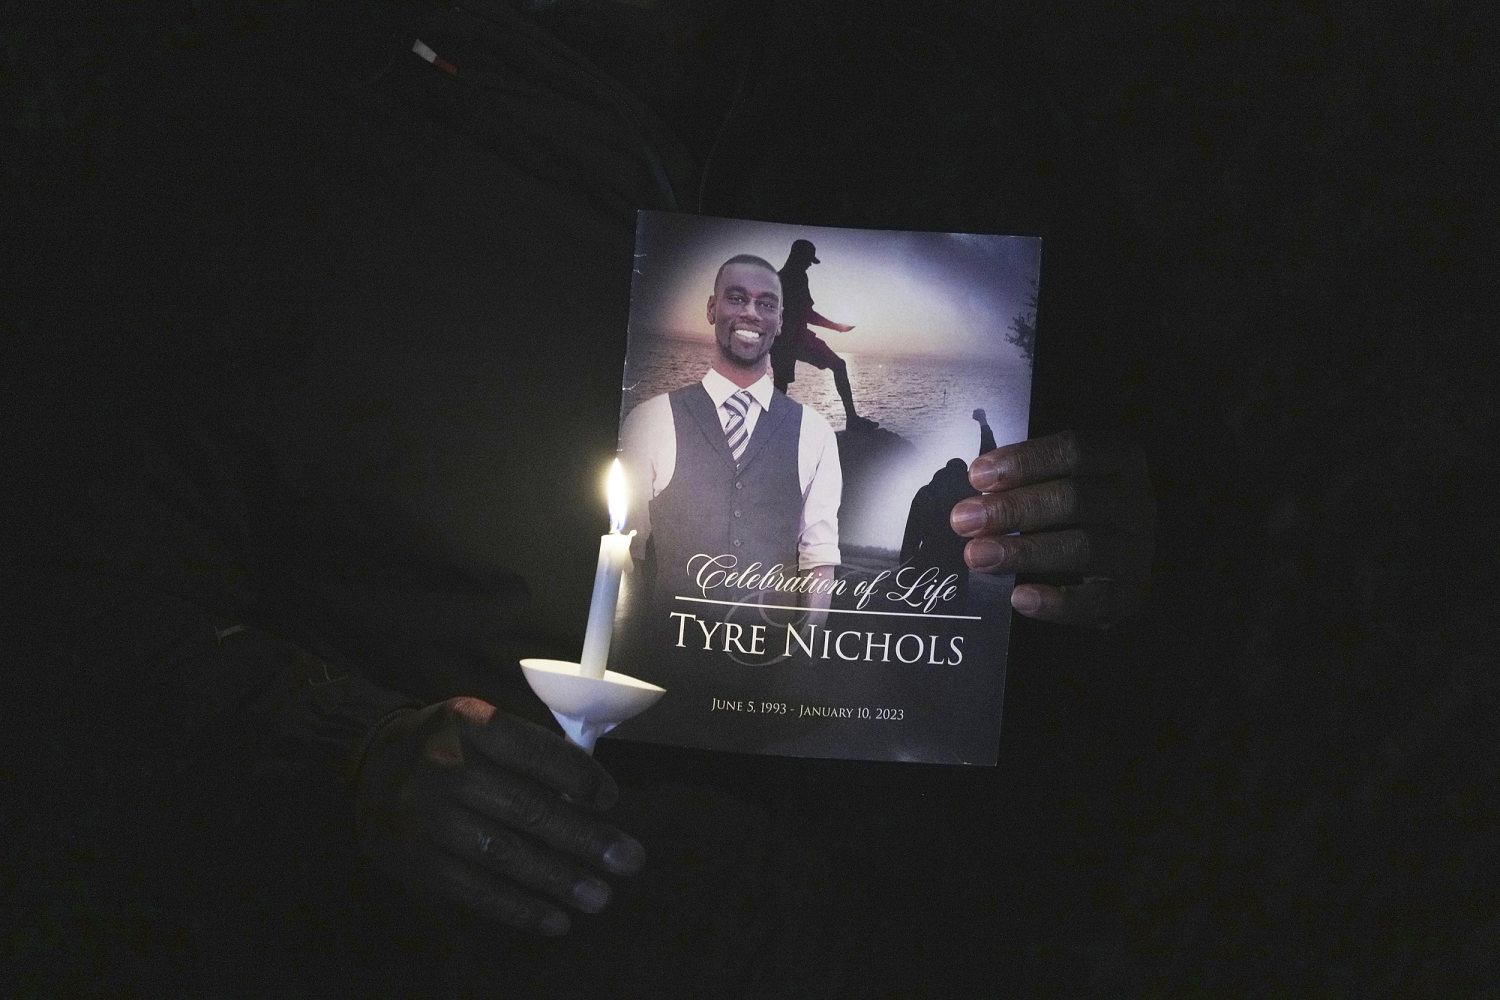 Tyre Nichols’ death was sickening. Yet not enough in Memphis has changed.